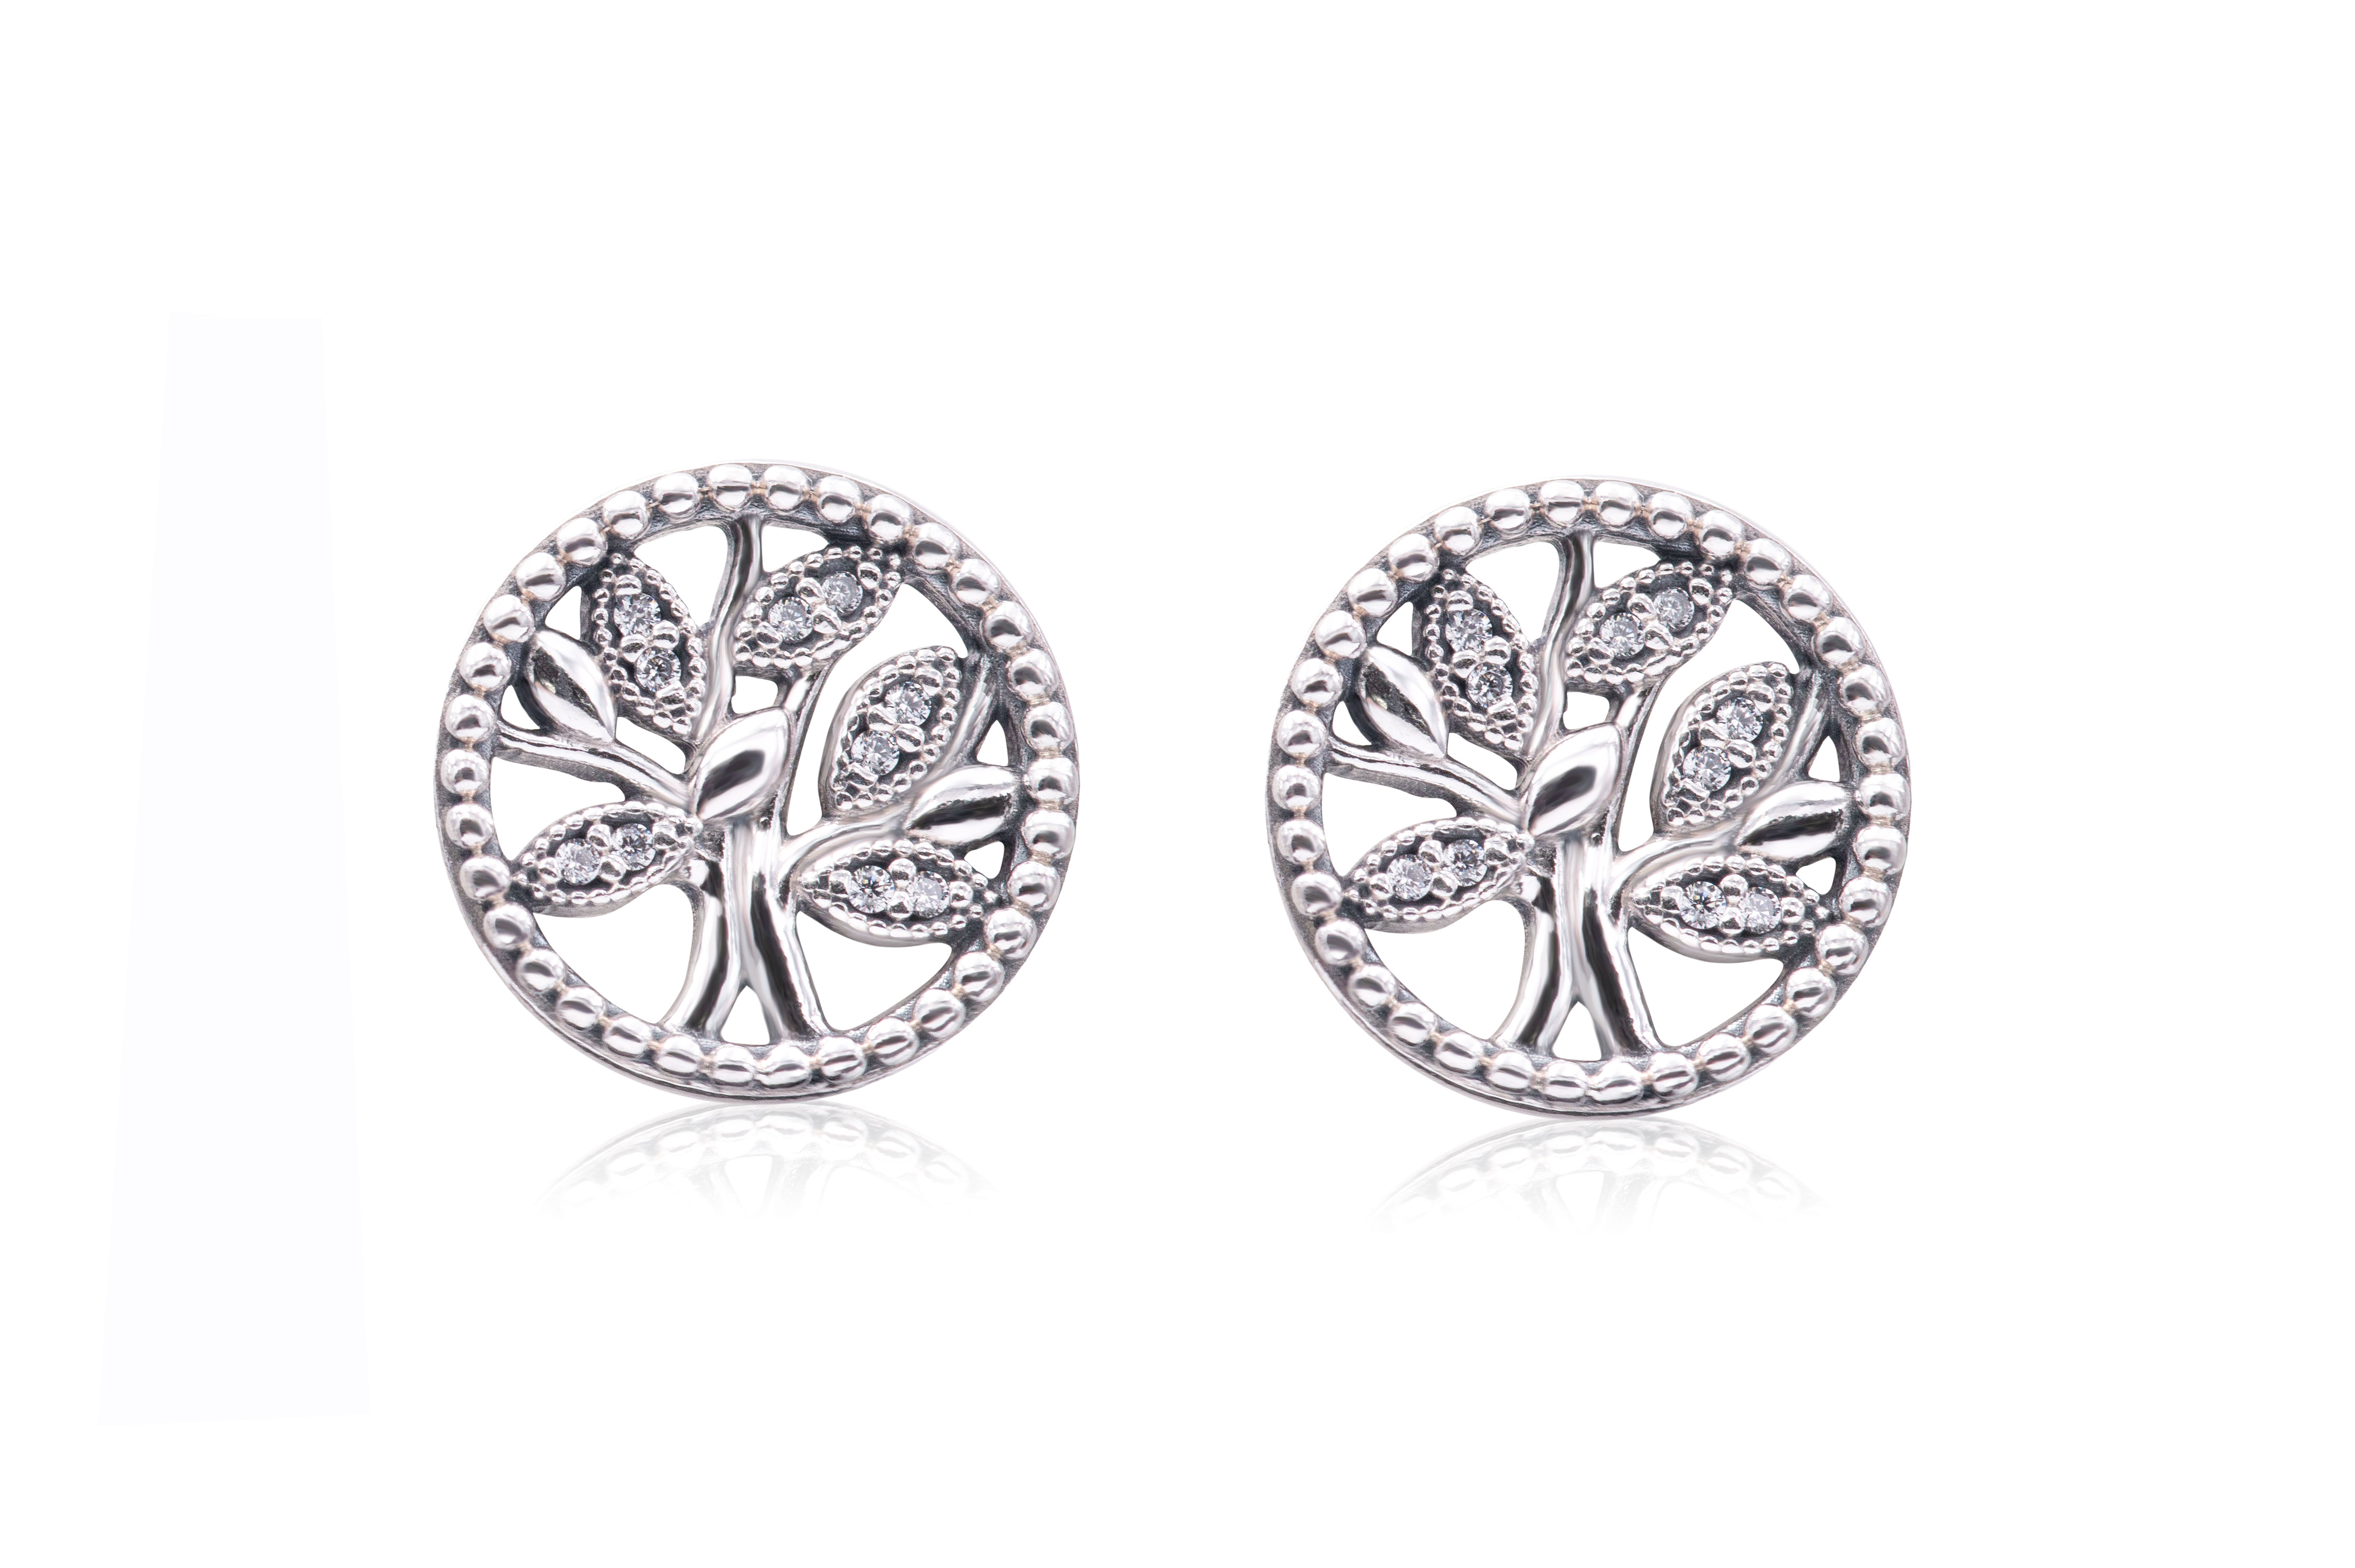 PANDORA Trees of Life 925 Sterling Silver Earrings - 297843CZ